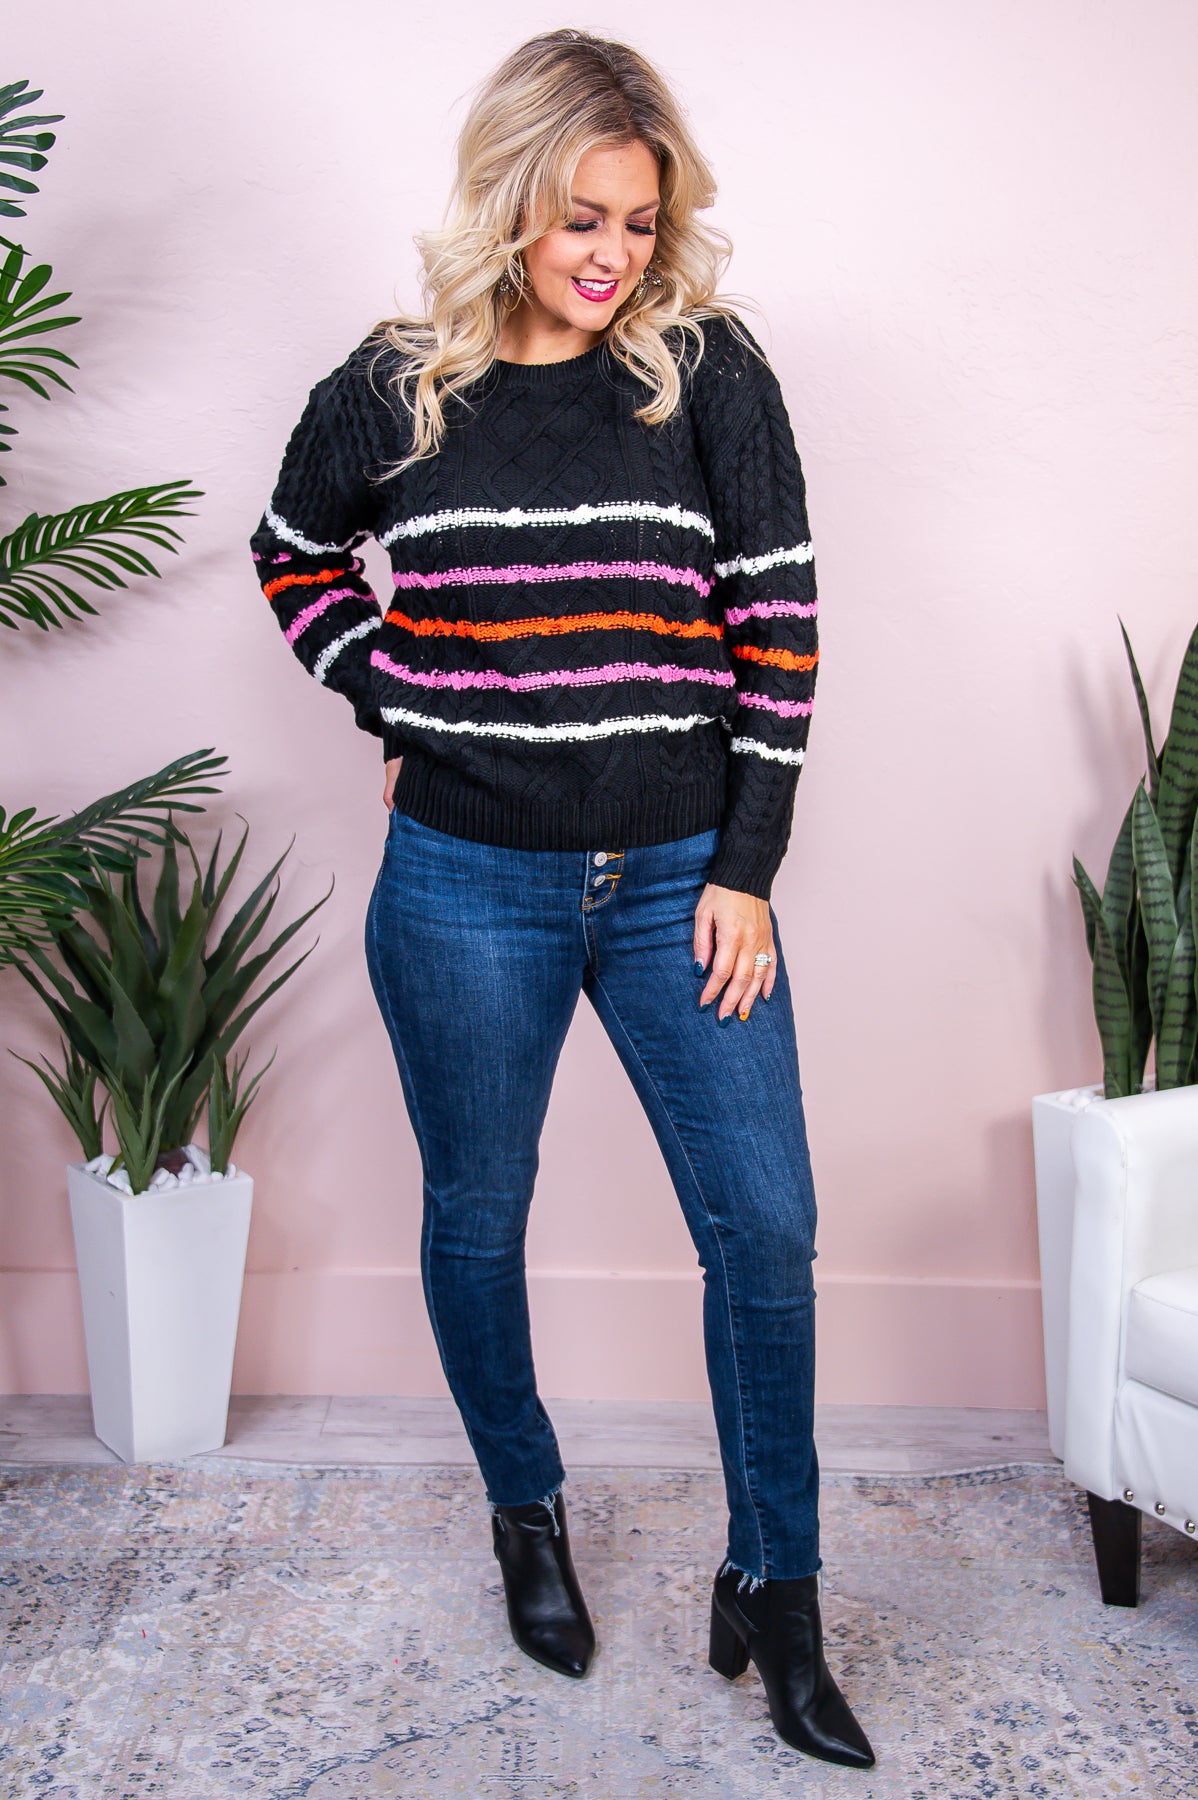 Planning To Impress Black/Multi Color Striped Knitted Sweater Top - T8455BK